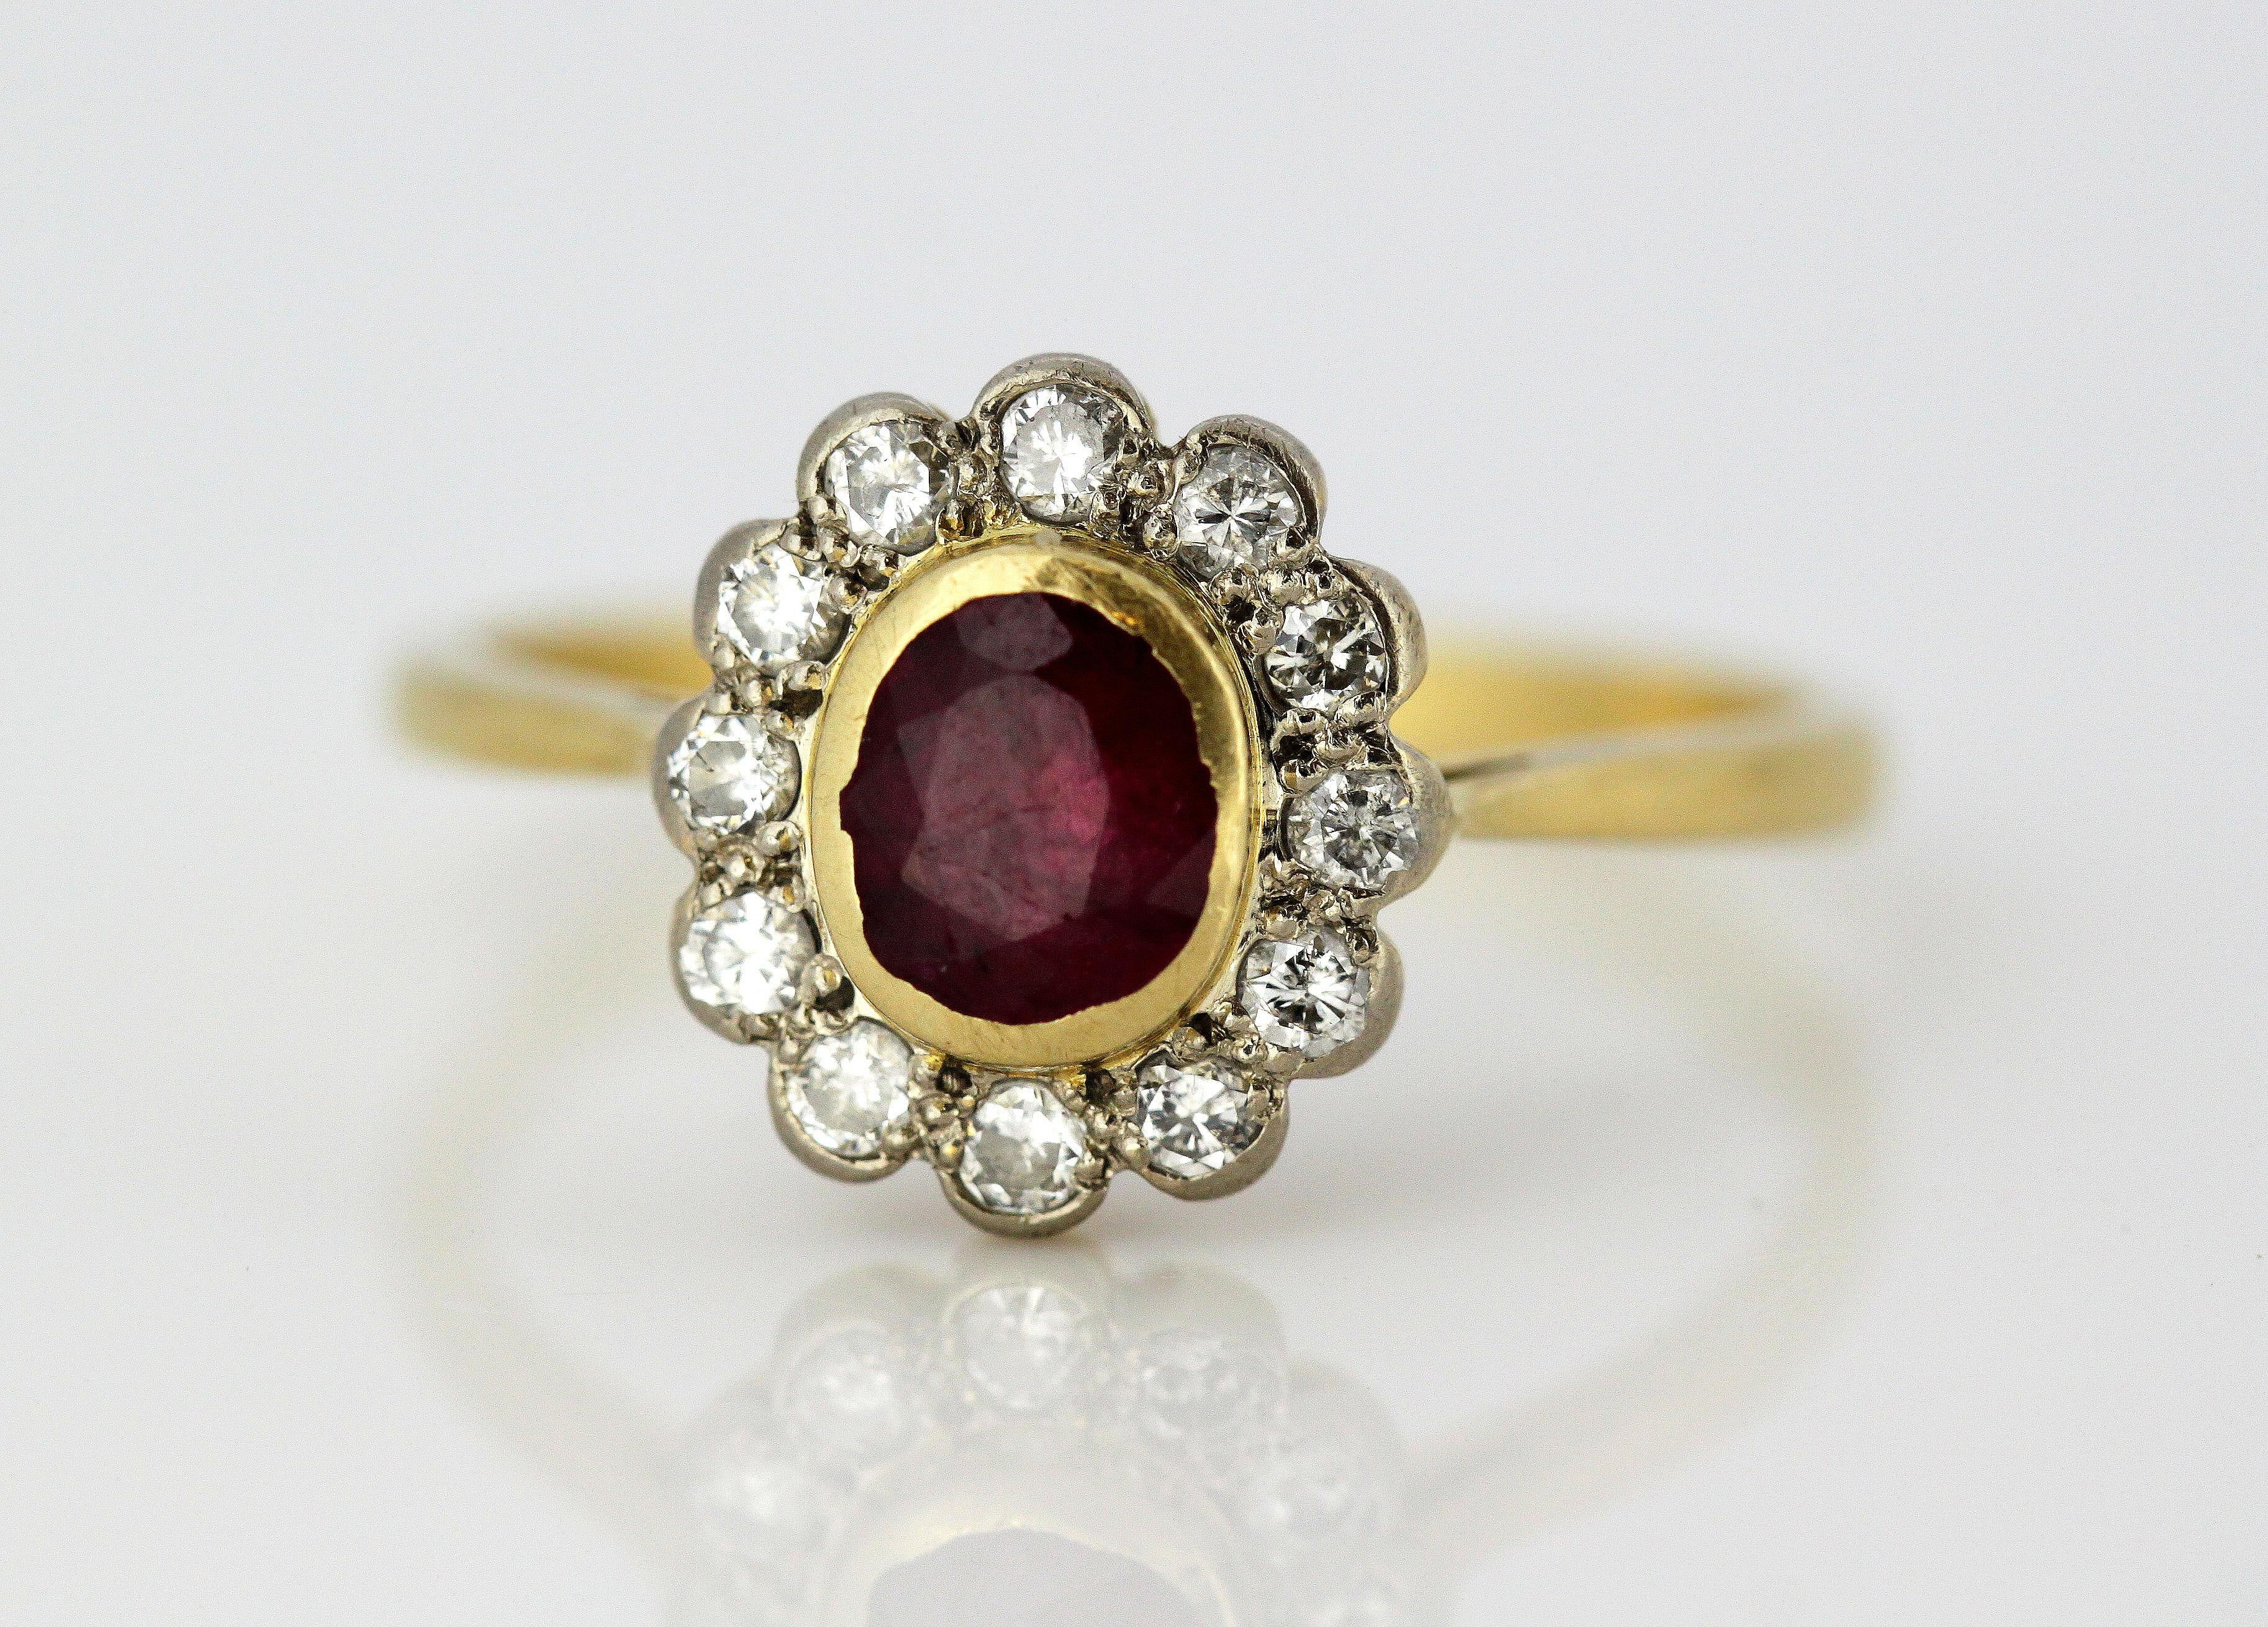 Vintage 18 Karat Gold Ladies Ring with Natural Ruby and Diamonds, London, 1985 3